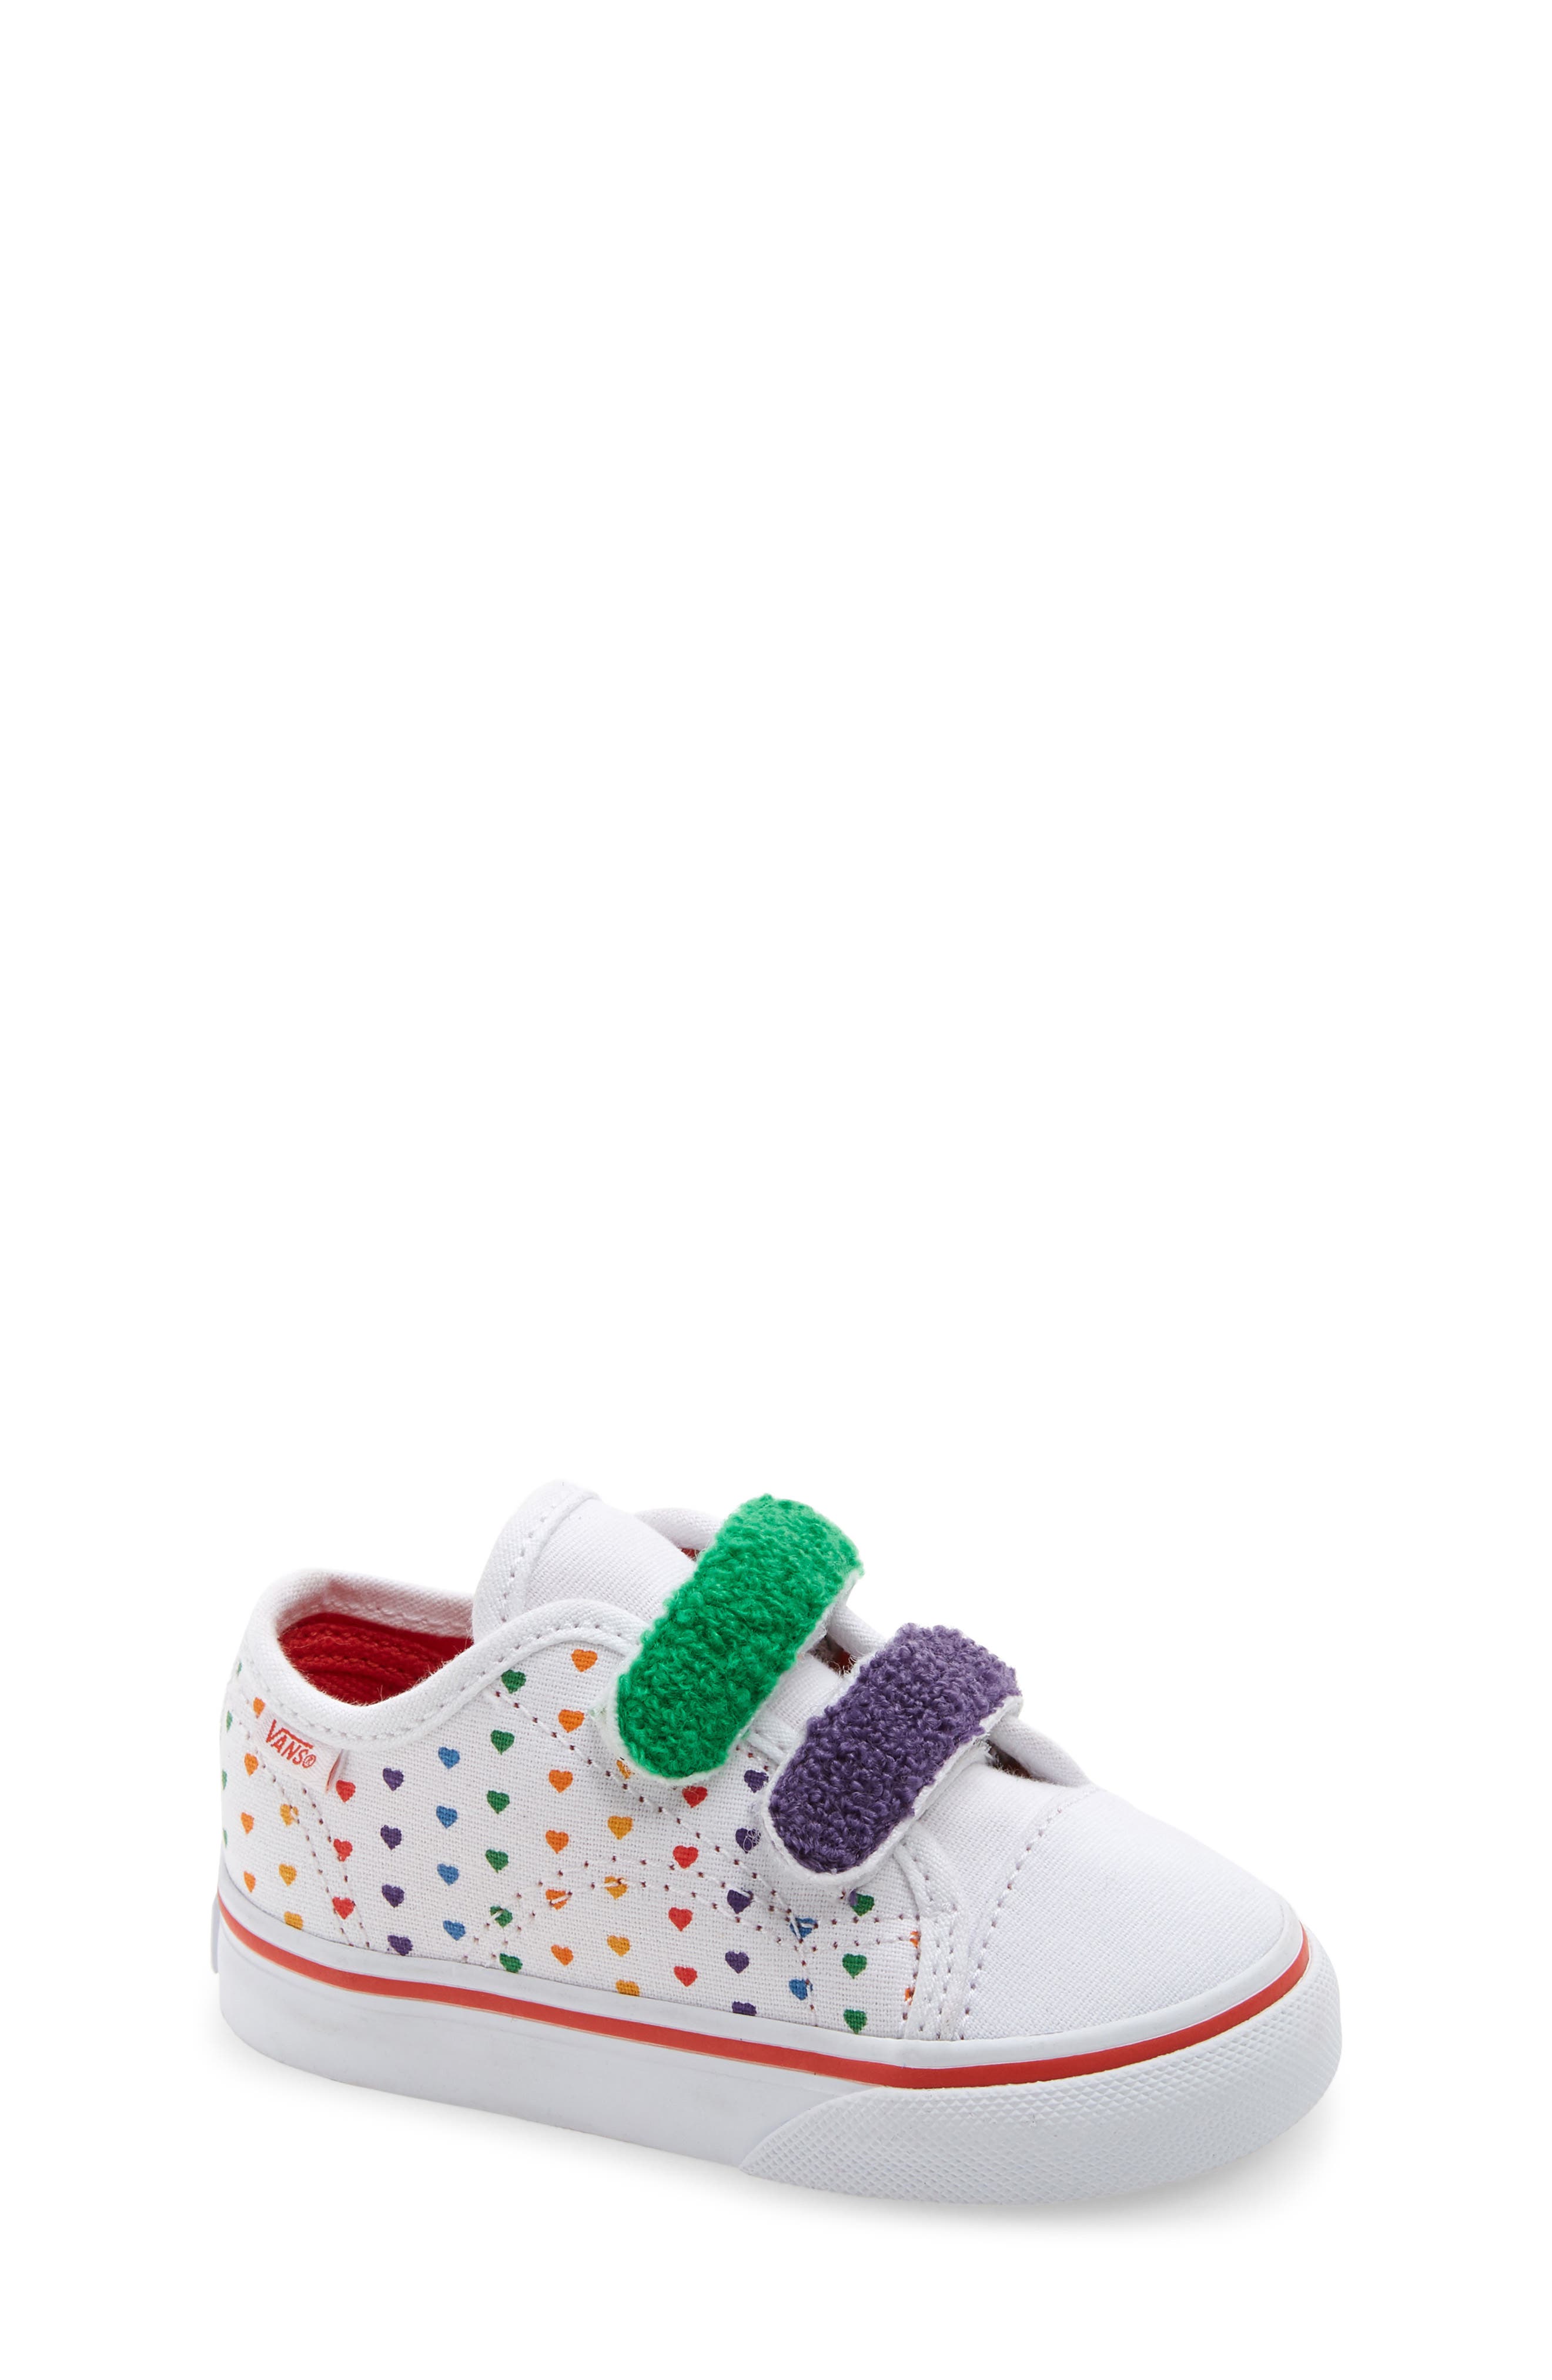 colorful vans for babies